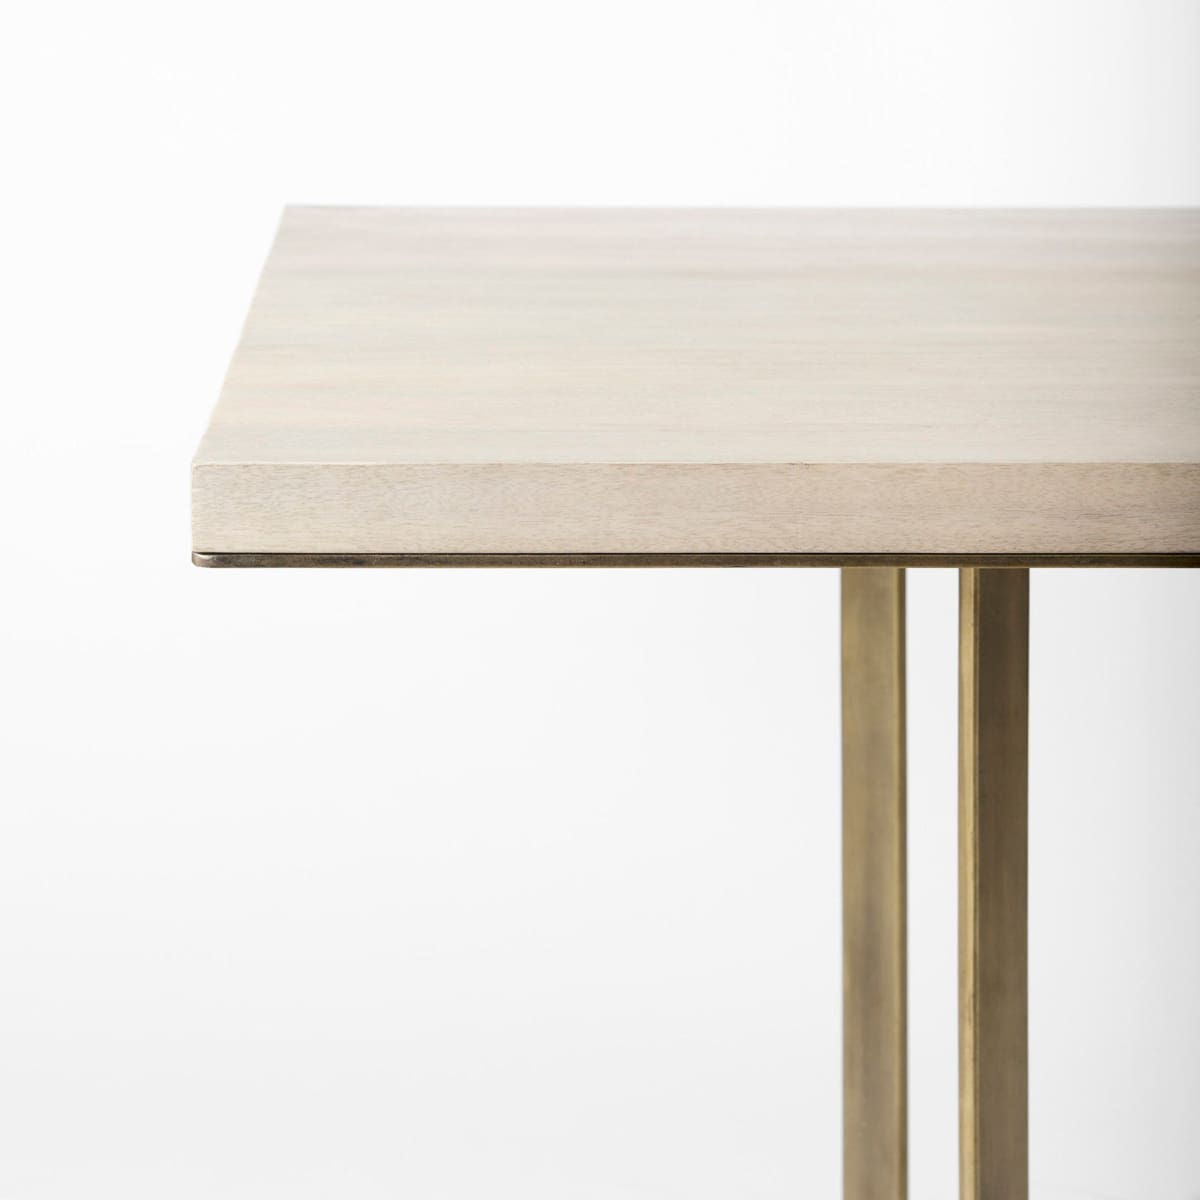 Faye Square Dining Table Light Brown Wood | Square - dining-table